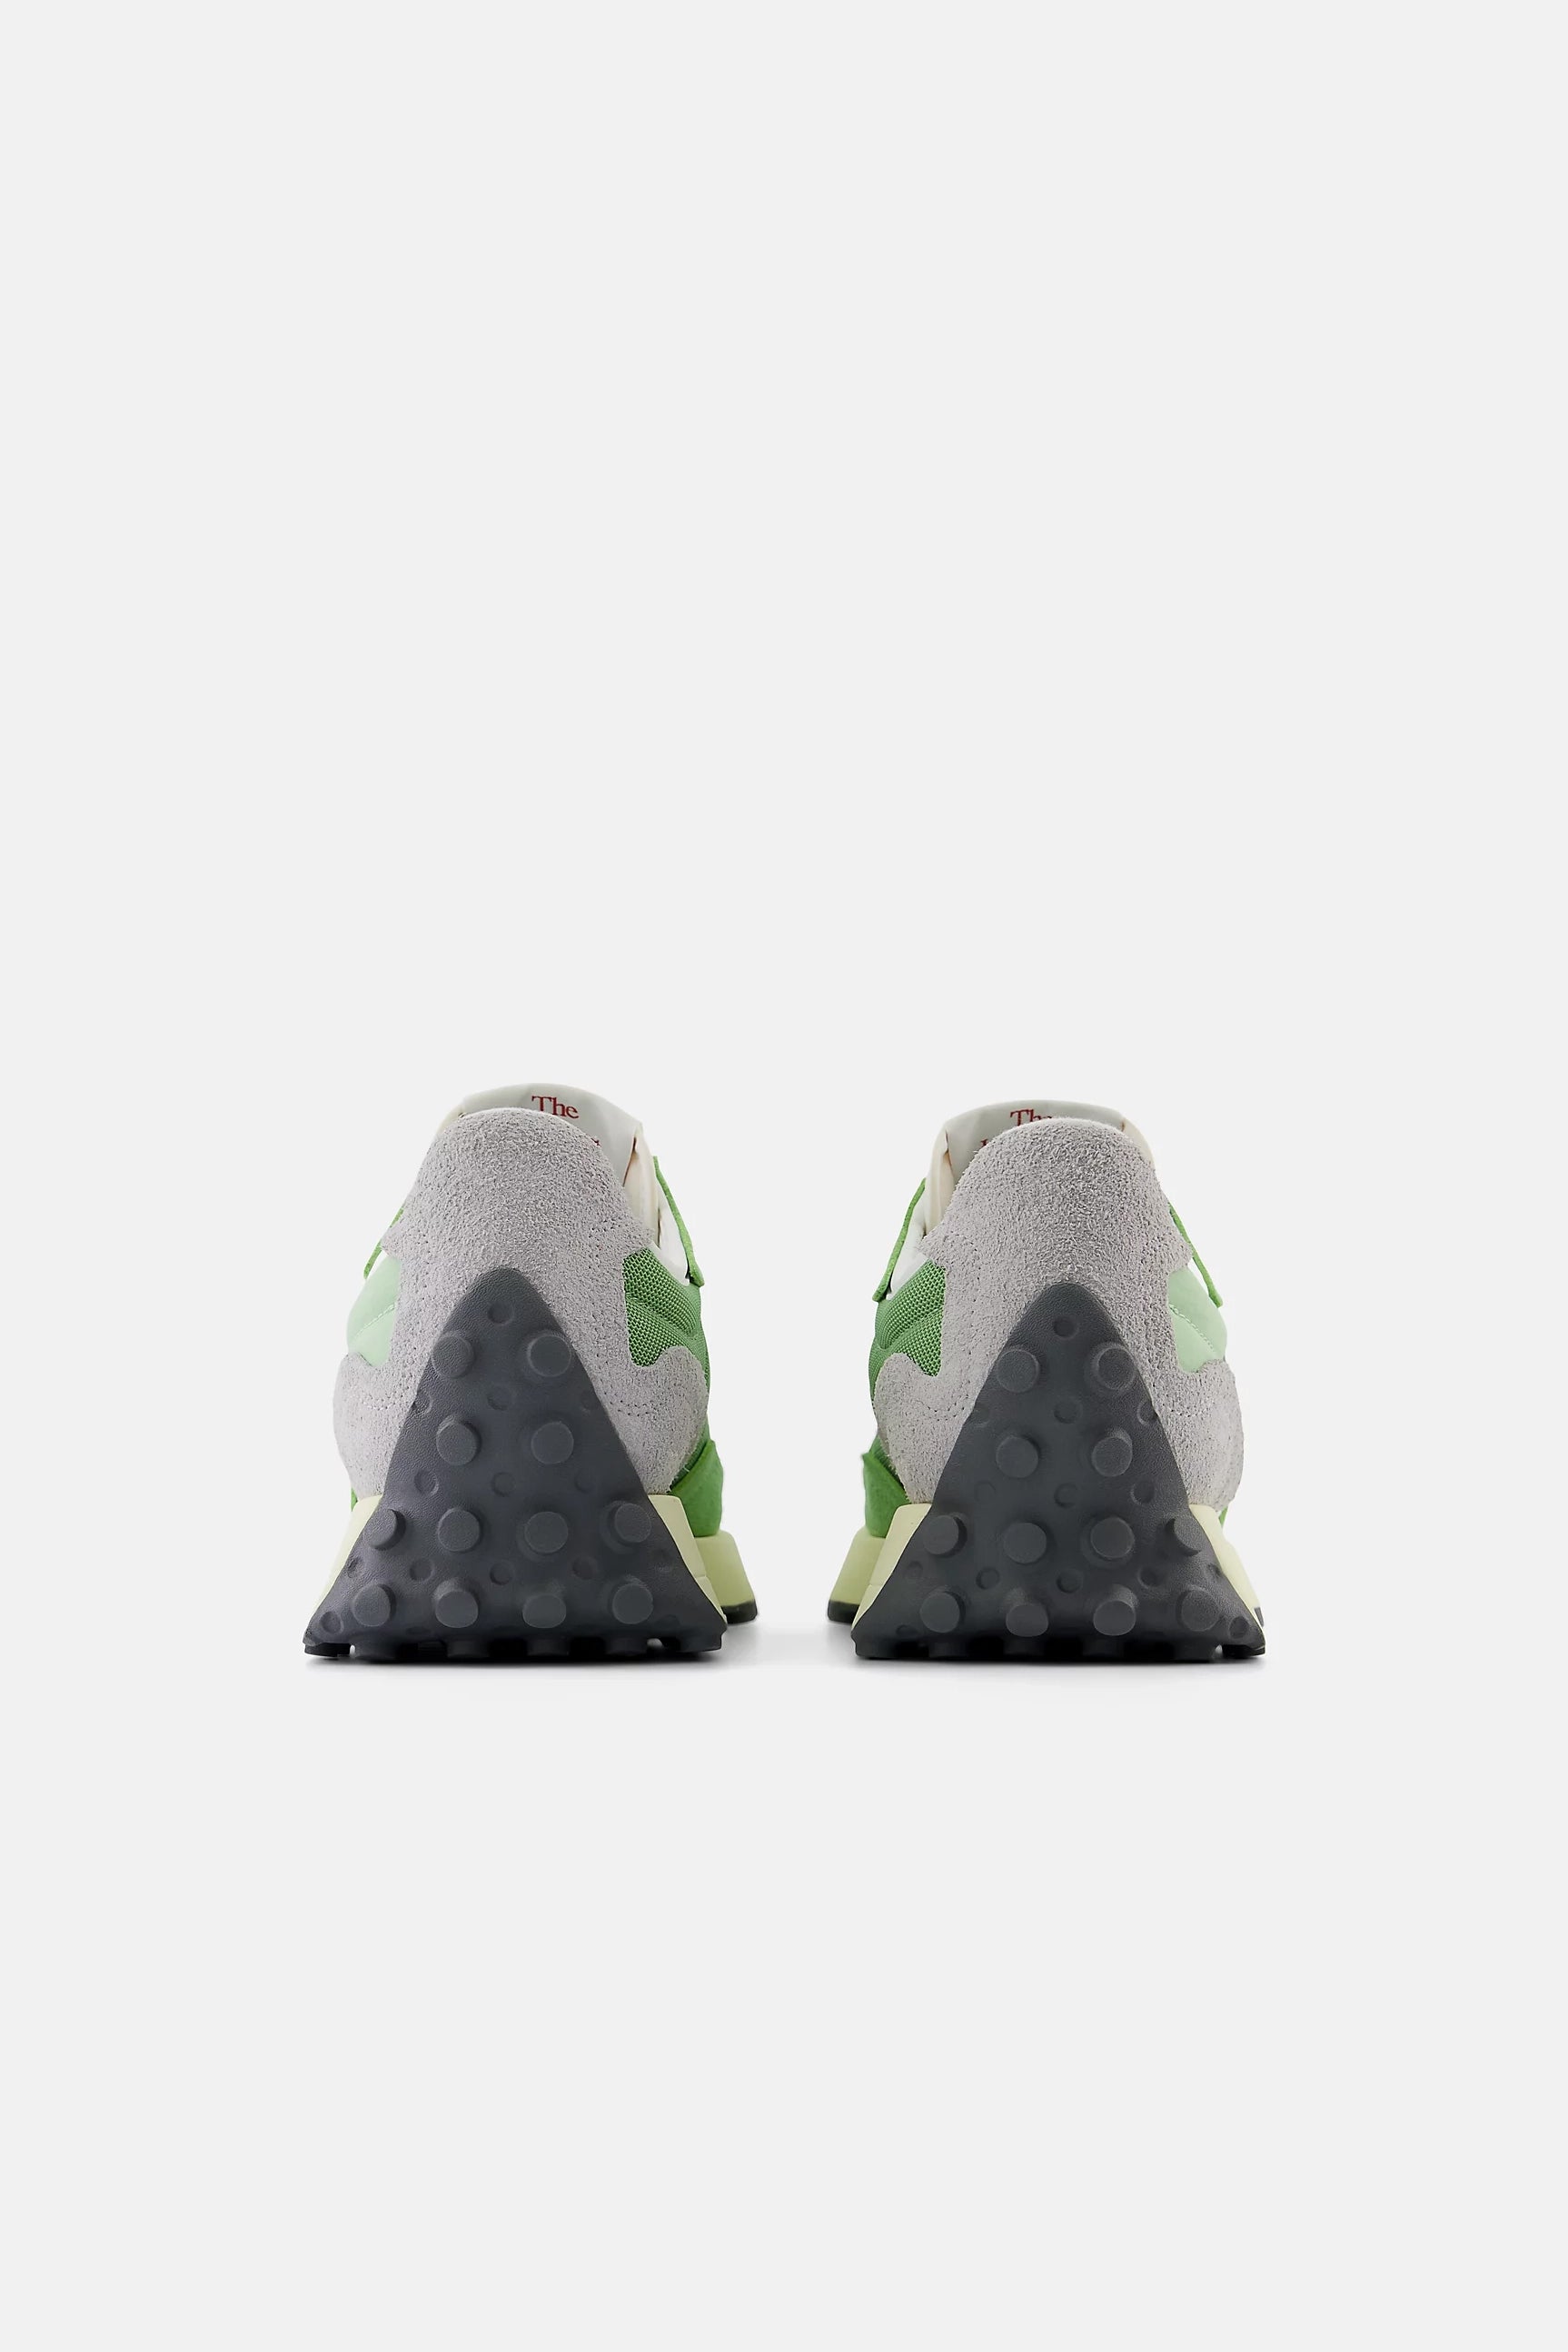 Sneaker 327 in Chive/AvocadoNew Balance - Anita Hass